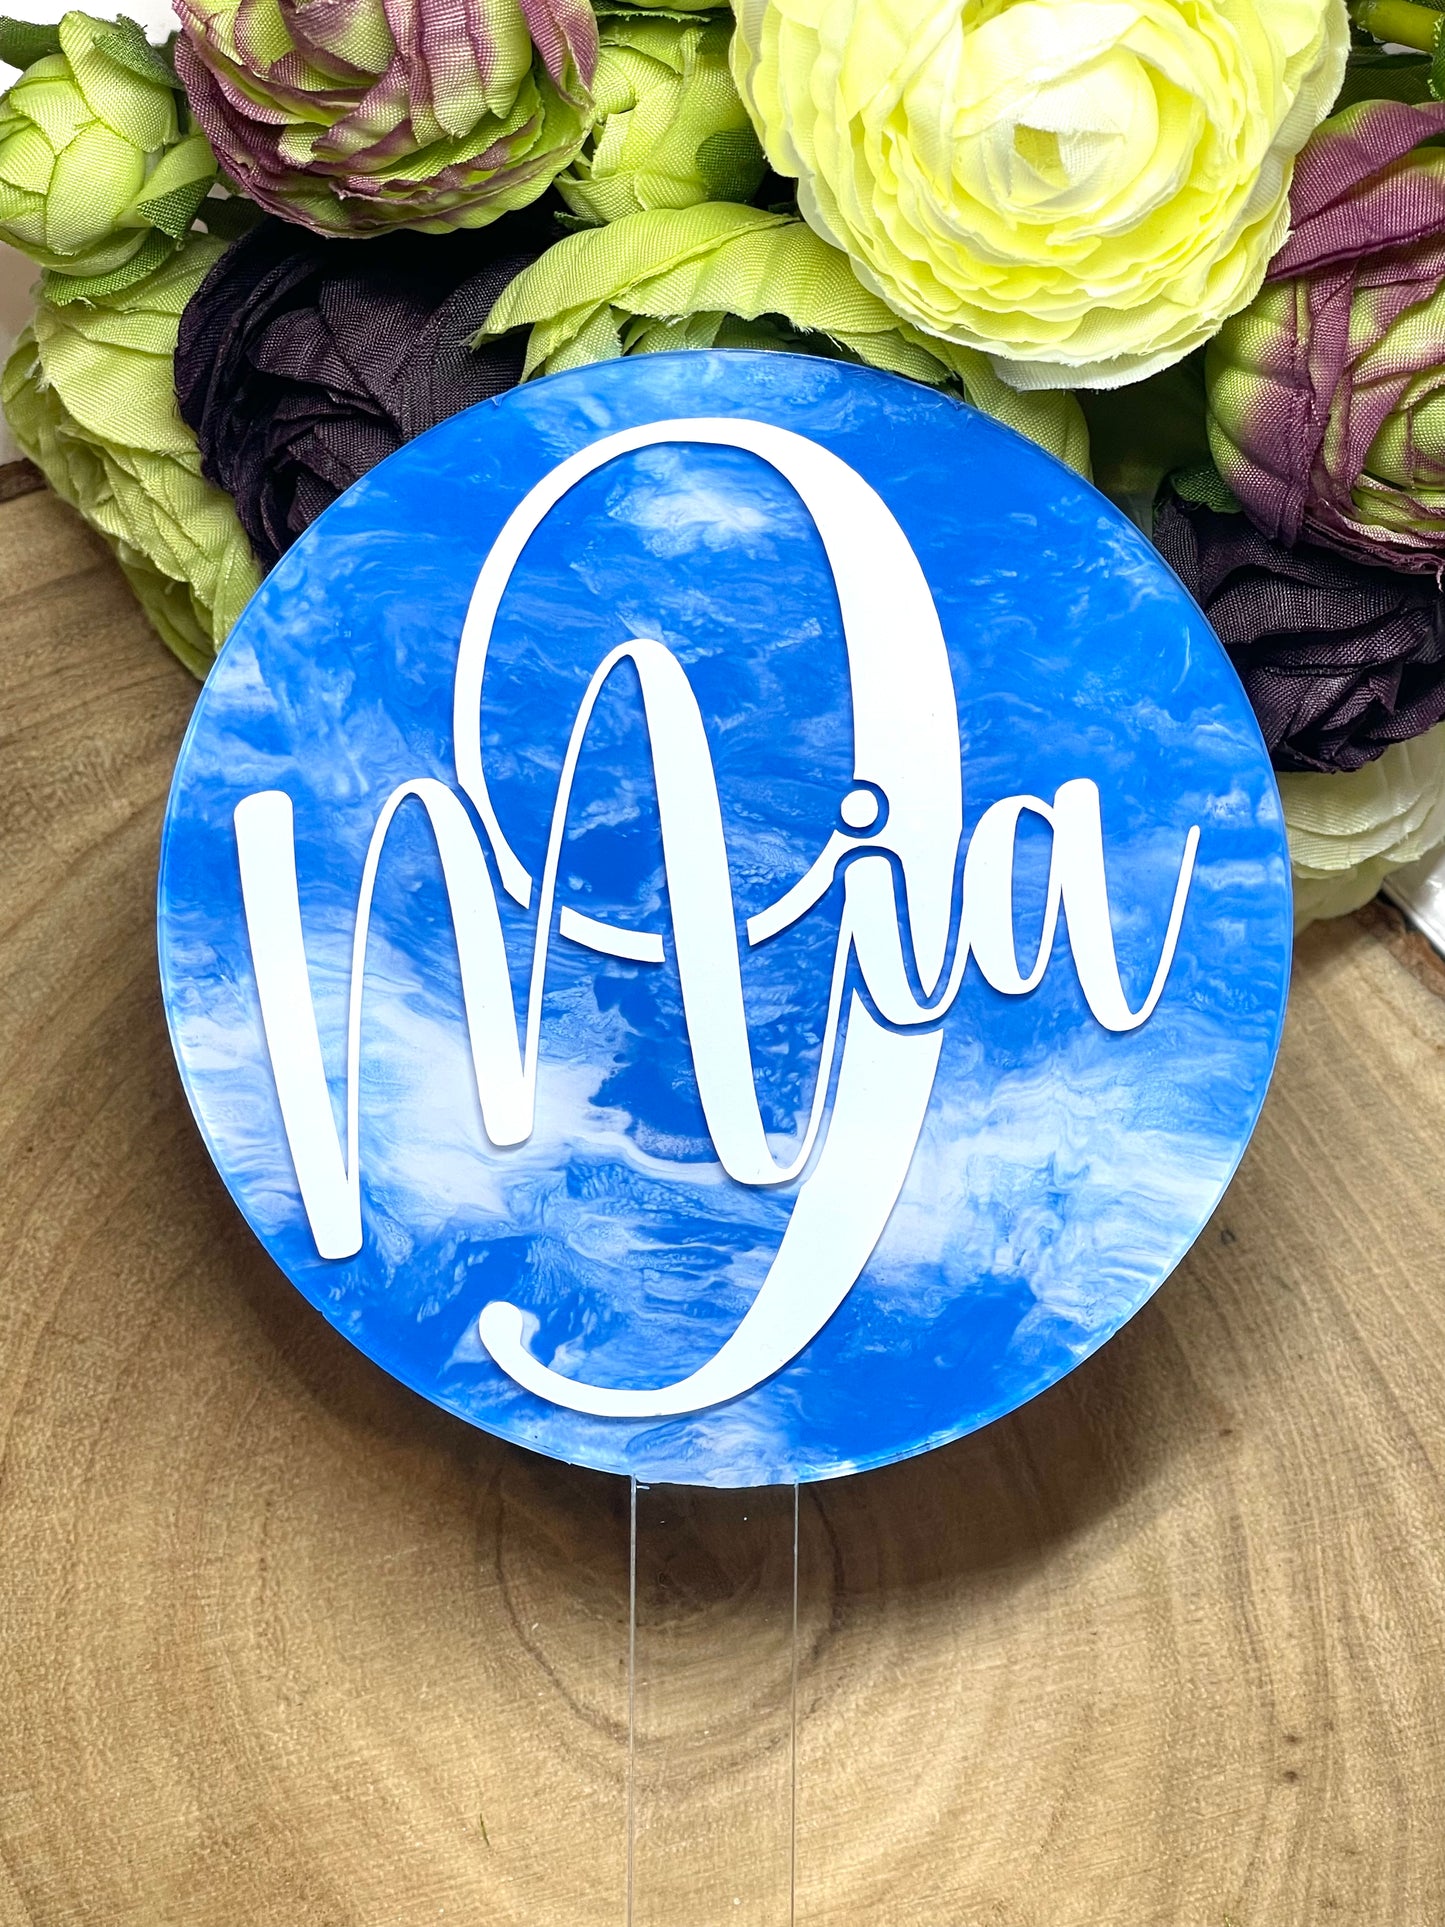 Personalised Acrylic Cake Topper, Marble Effect Painted Paddle Topper